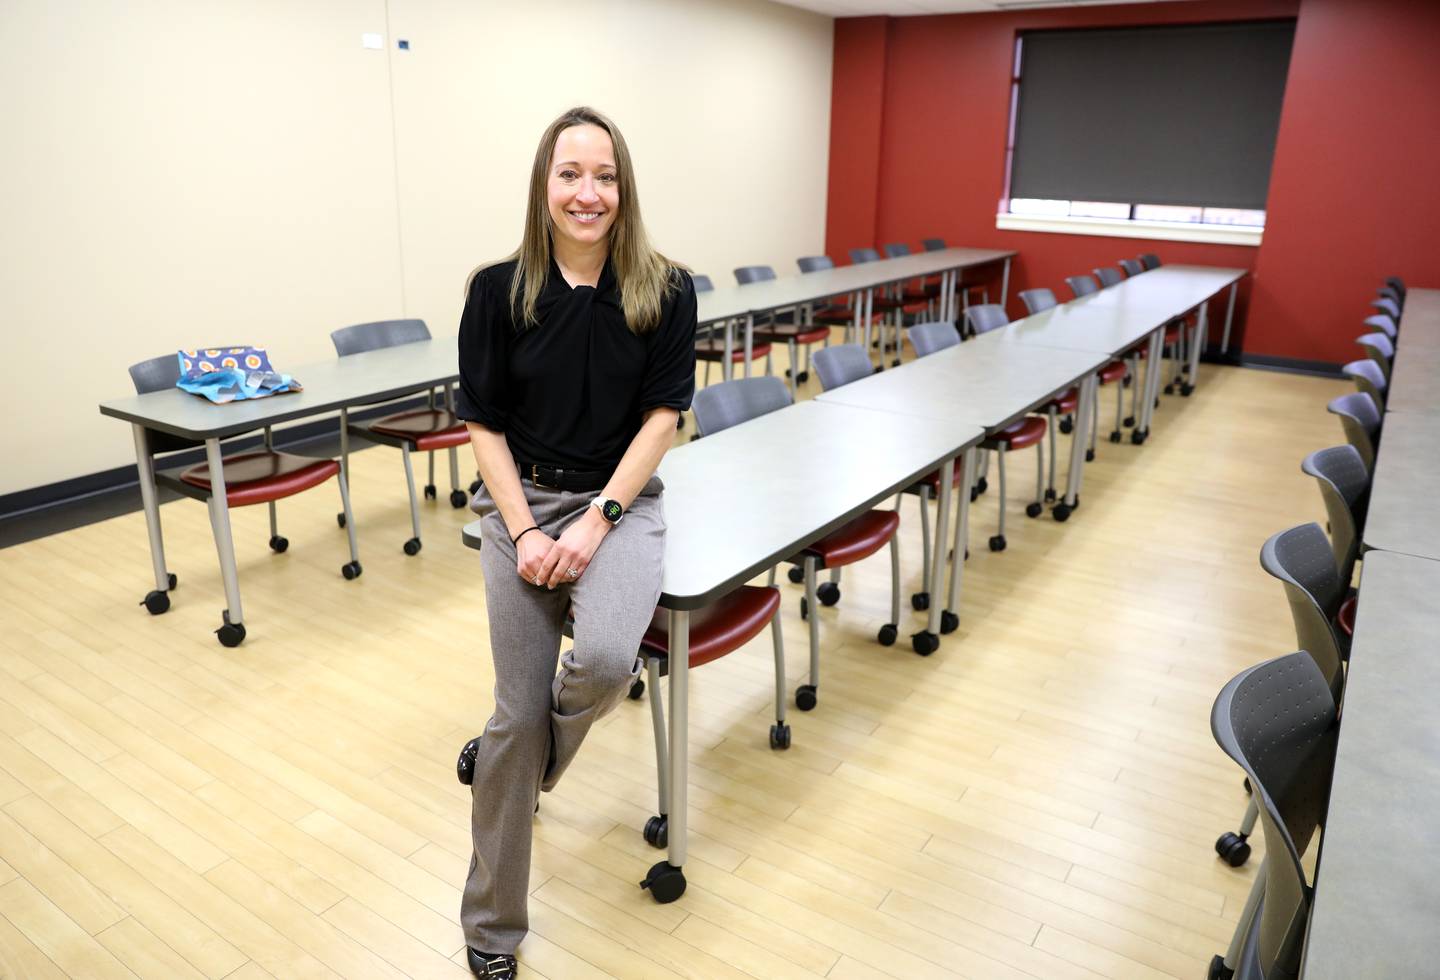 Heather Engelhart is an instructor in the Waubonsee Community College’s Adult Education Division at the Aurora campus.